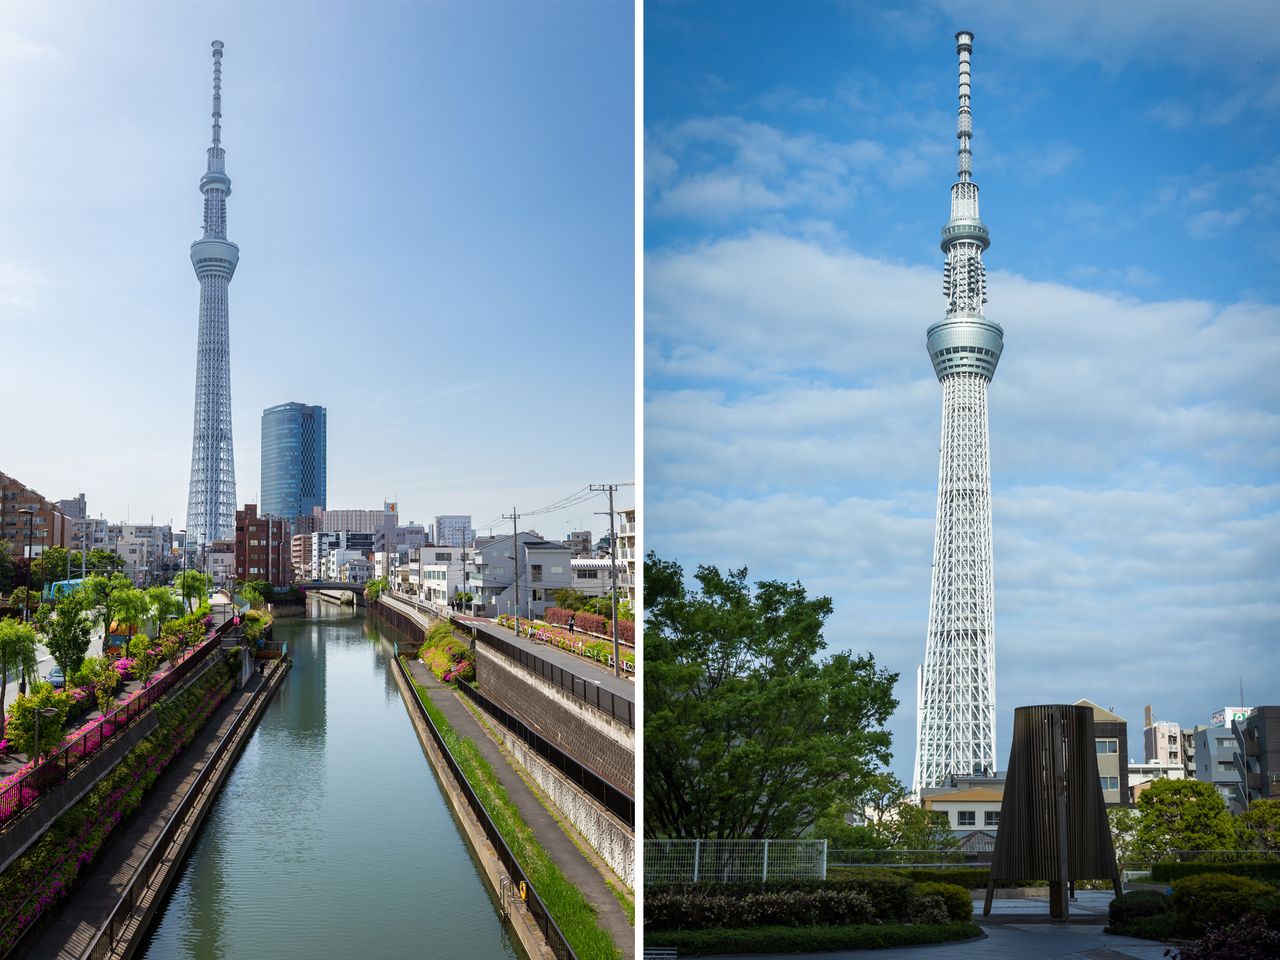 At left, the Skytree appears symmetrical when viewed from the Yanagishima pedestrian bridge over the Kitajukken River, but looks broader at the base and seems to lean to the right when seen from the Sumida municipal office.